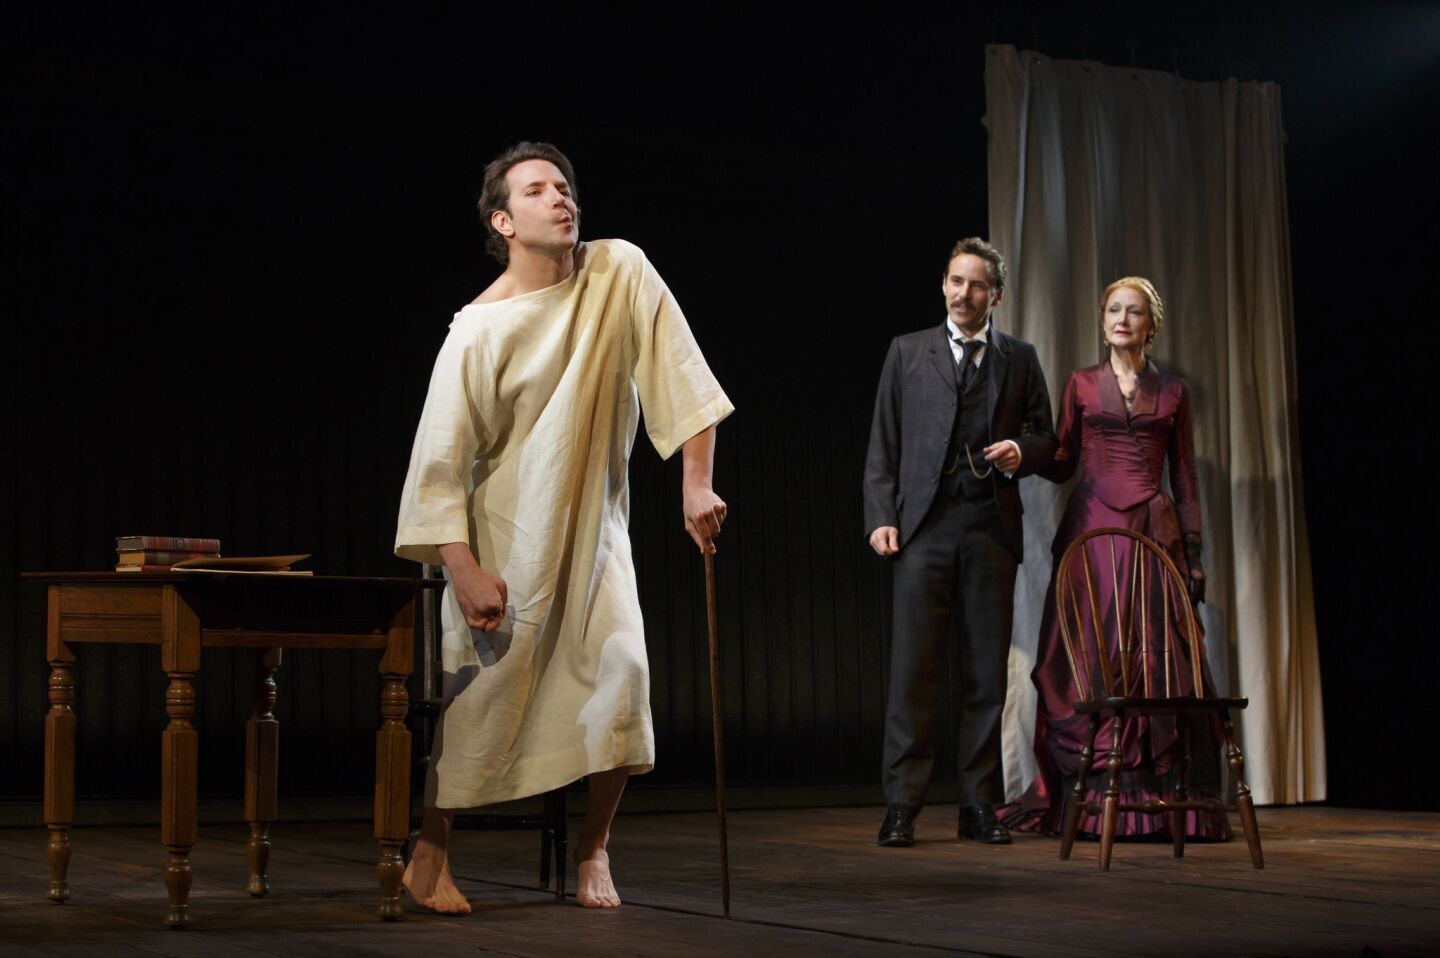 Bradley Cooper, left, Alessandro Nivola and Patricia Clarkson perform in "The Elephant Man" at the Booth Theatre in New York.